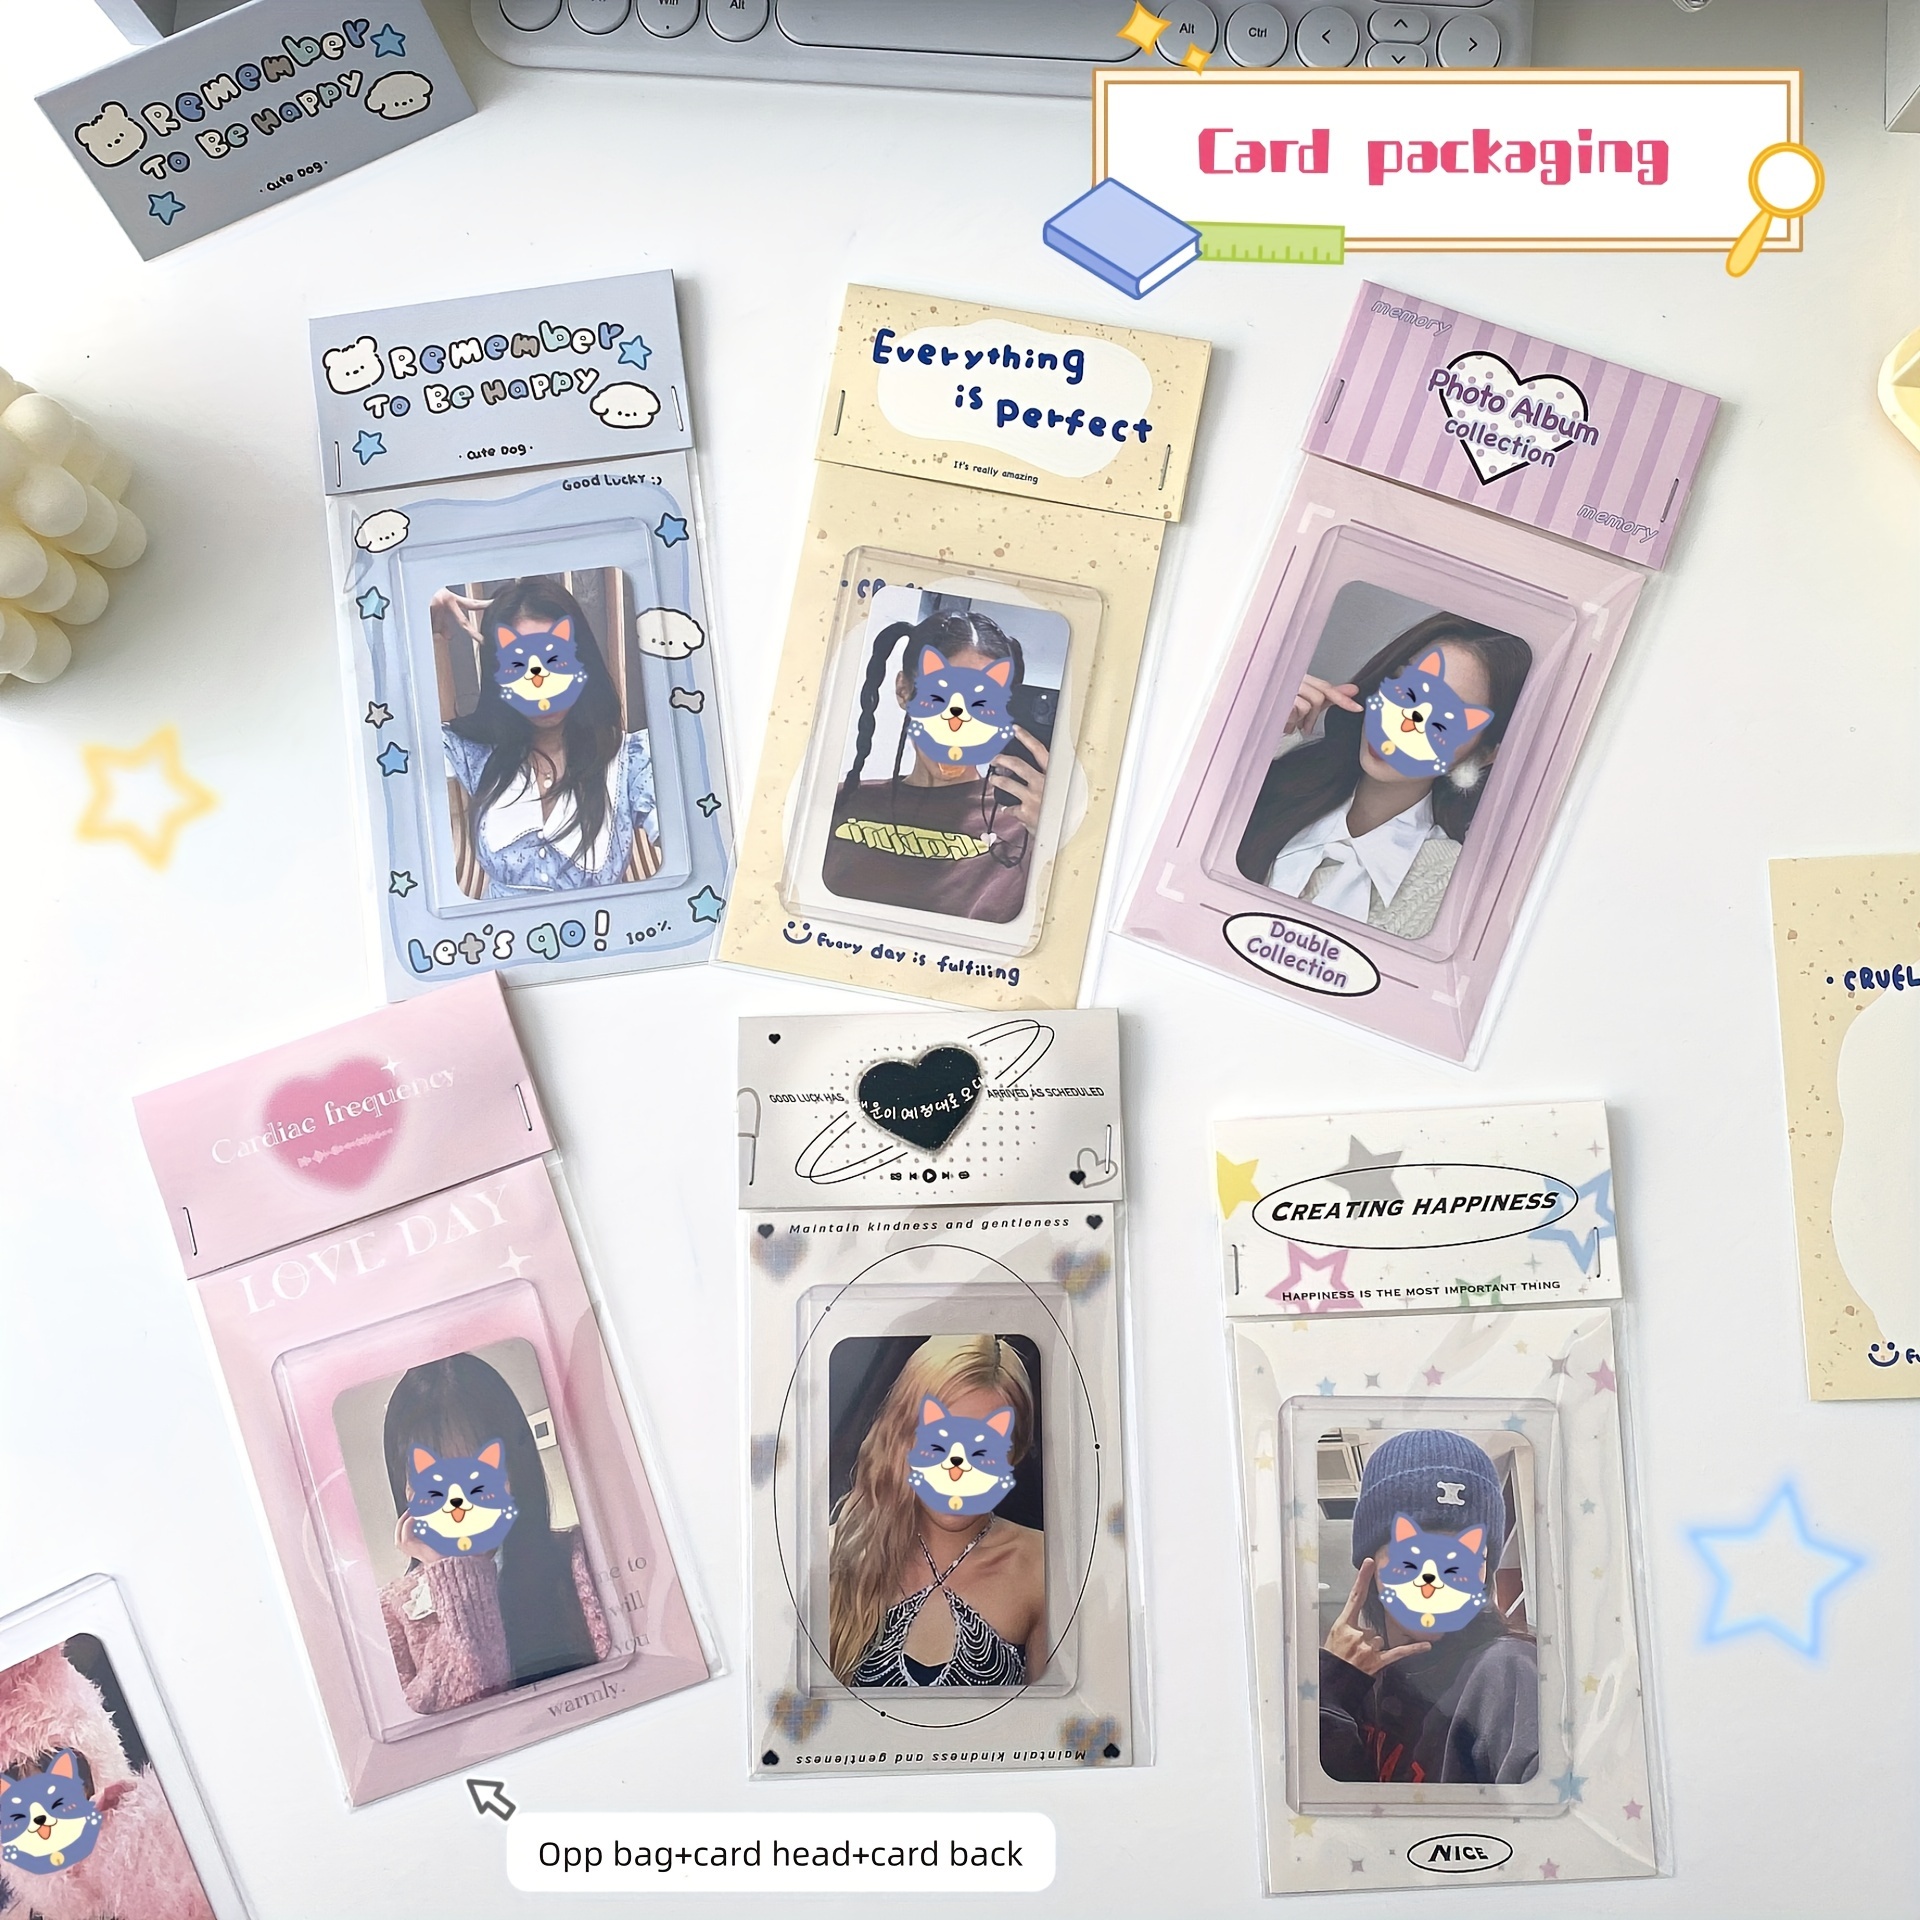 

5pcs/10pcs New Instagram-inspired Card Heads, Backs, And Opp Bags - Perfect For Card Making And Gift Wrapping